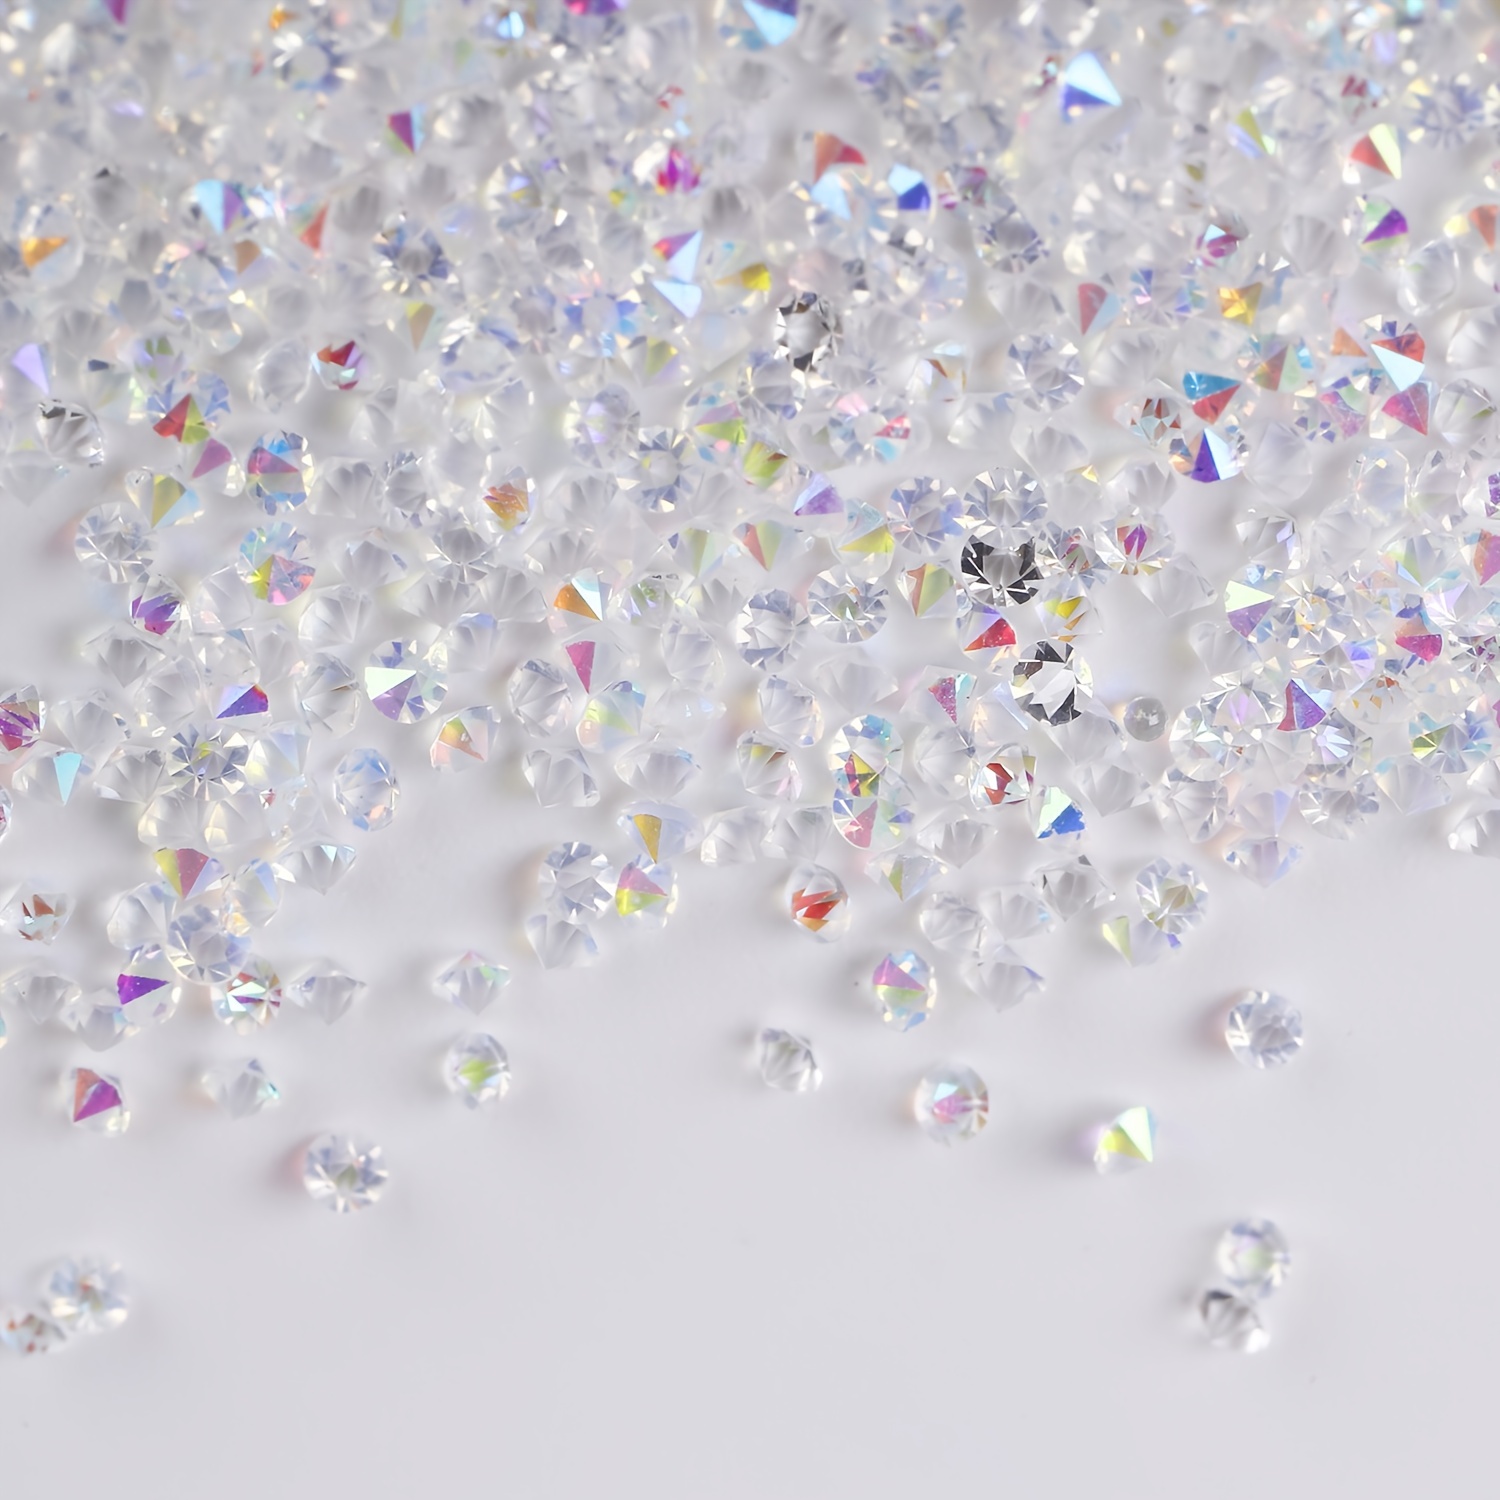 AB Clear Rhinestones Glass Gemstones Micro Beads Metal Accents